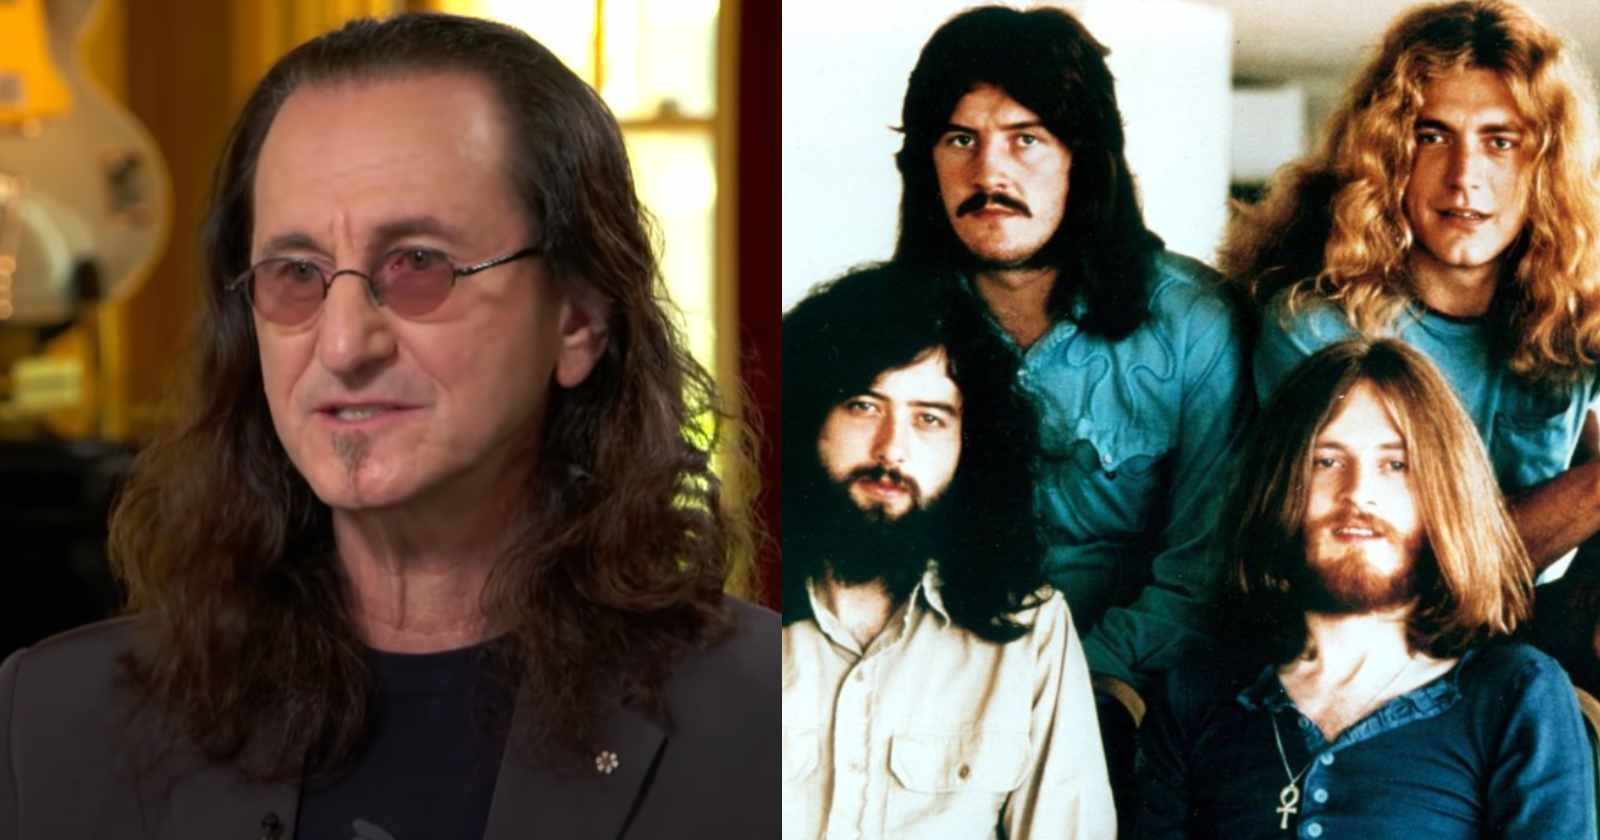 geddy lee and led zeppelin